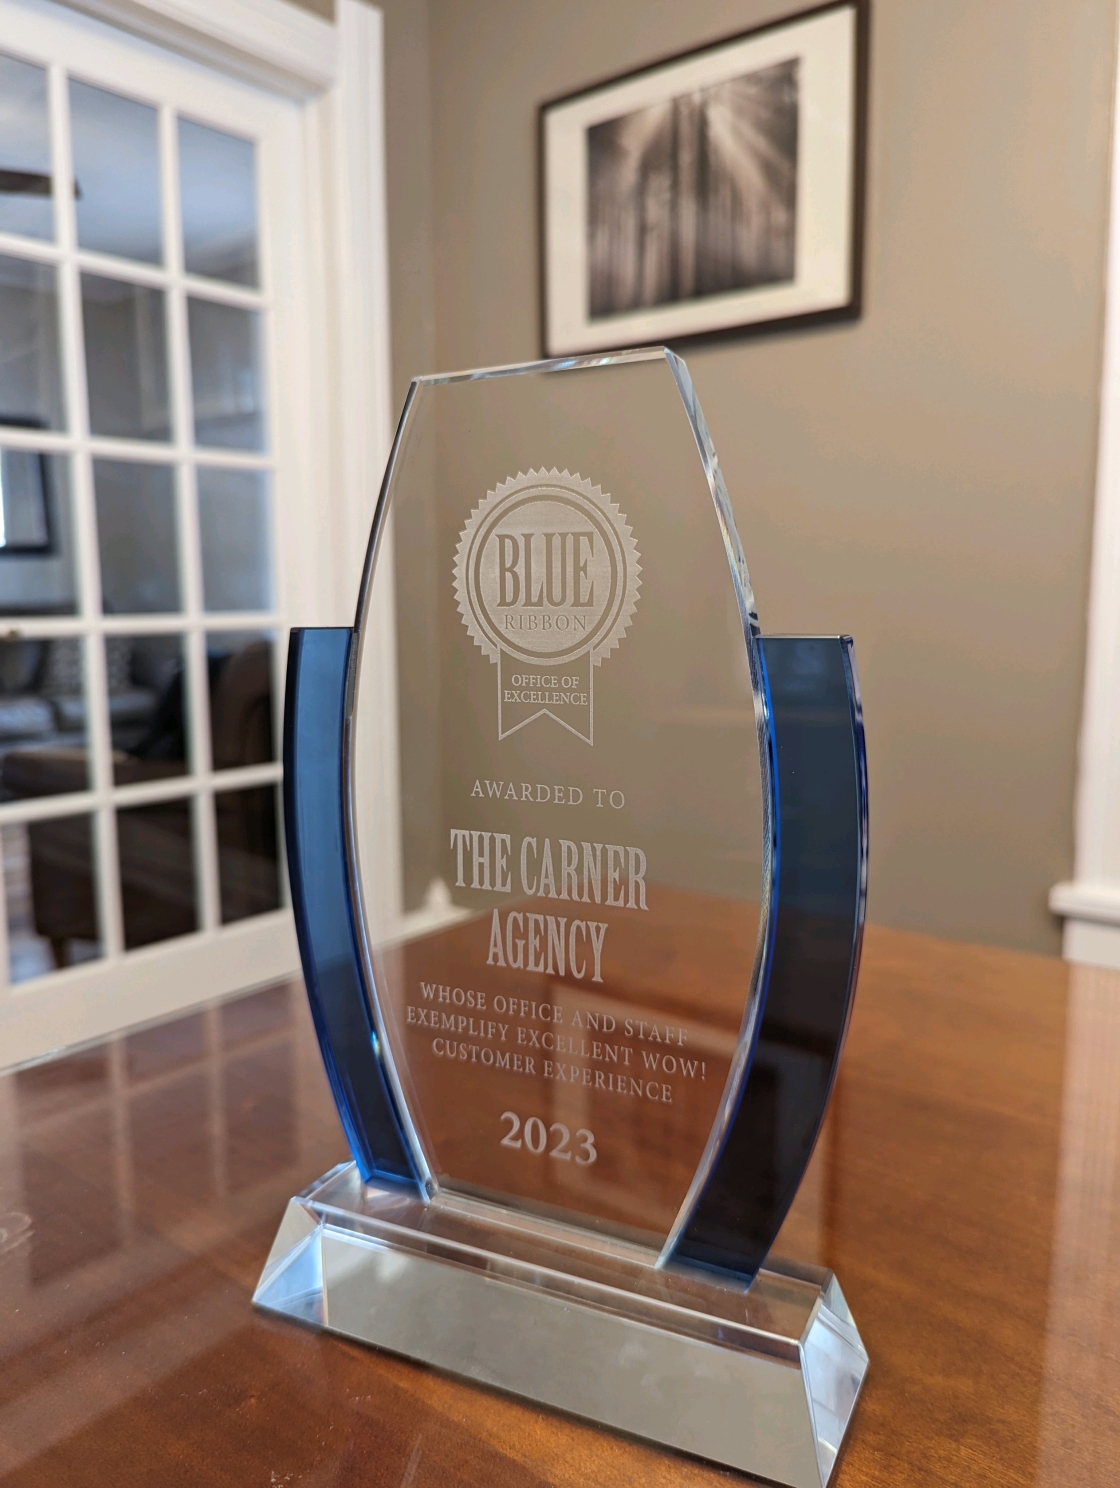 Blue Ribbon Office of Excellence Award